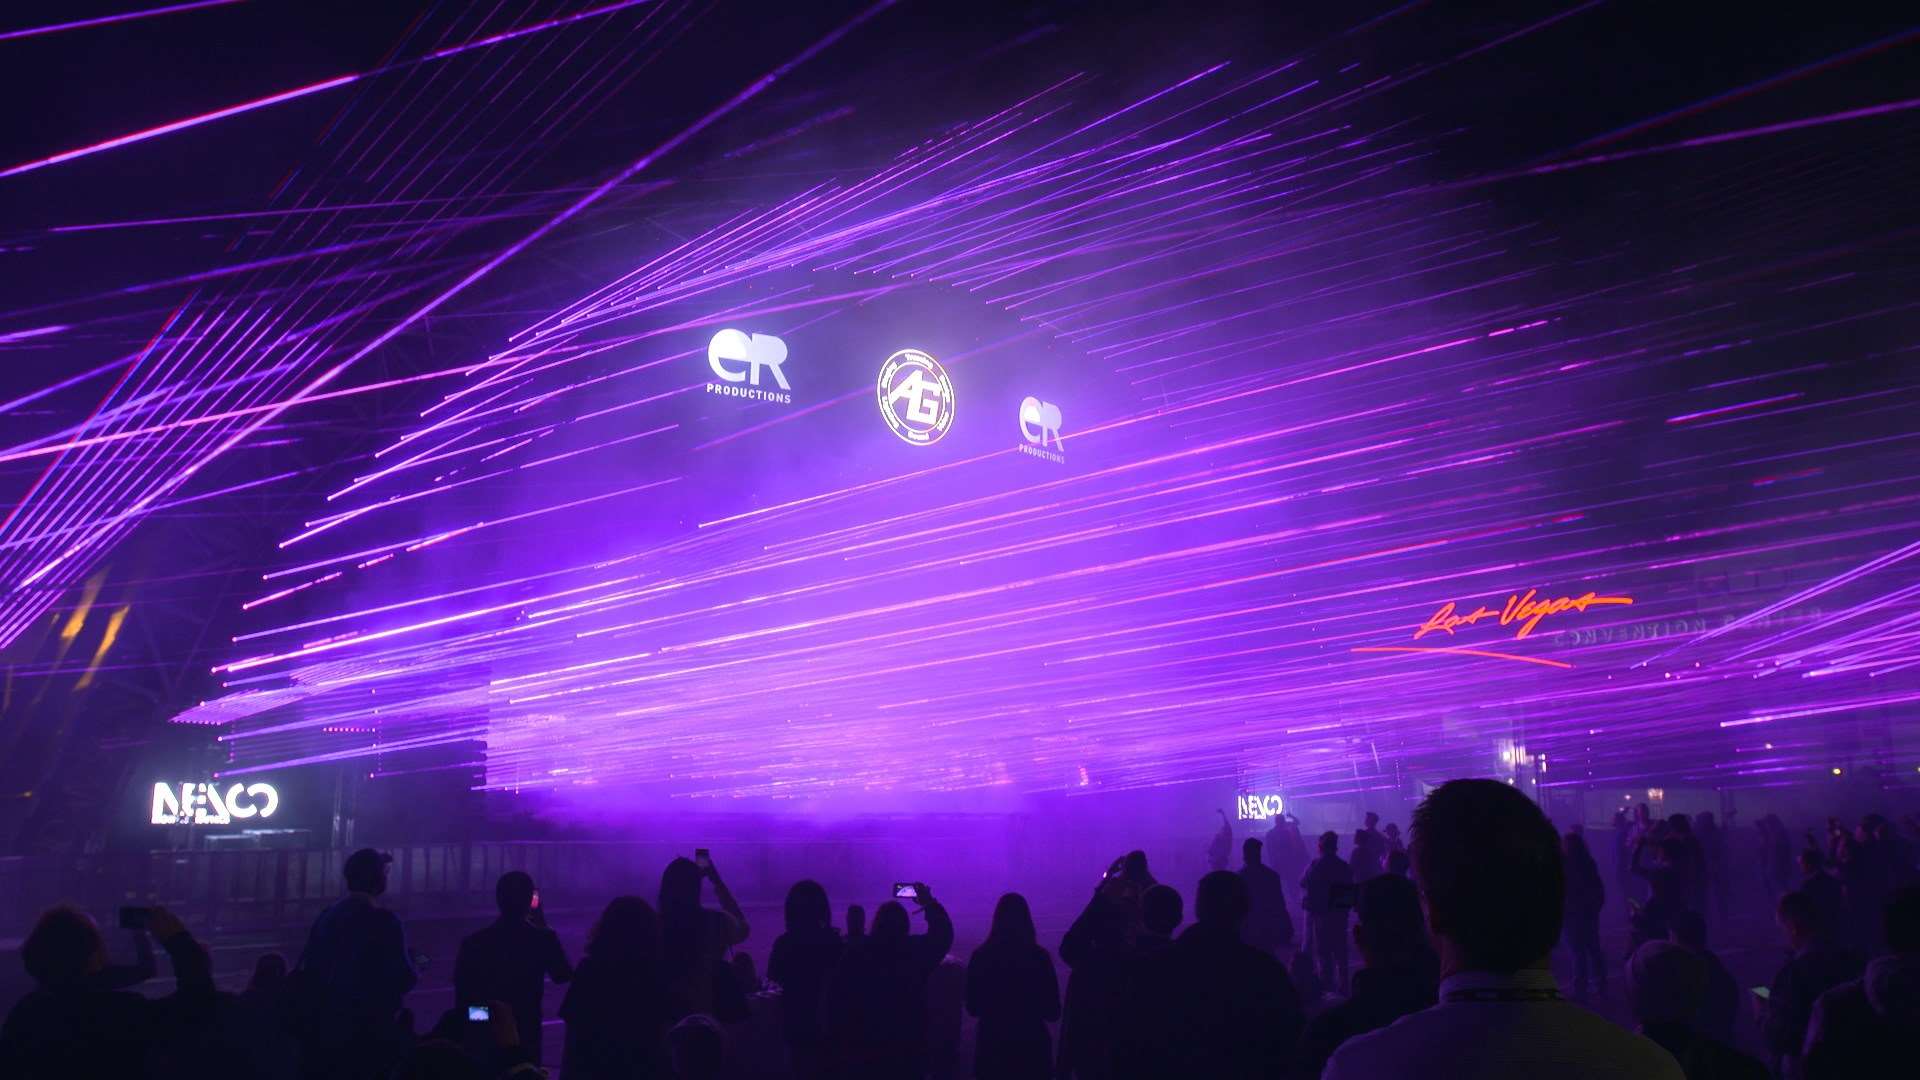 ER Productions in Dartford set the Guinness World Record for the largest laser show in Las Vegas